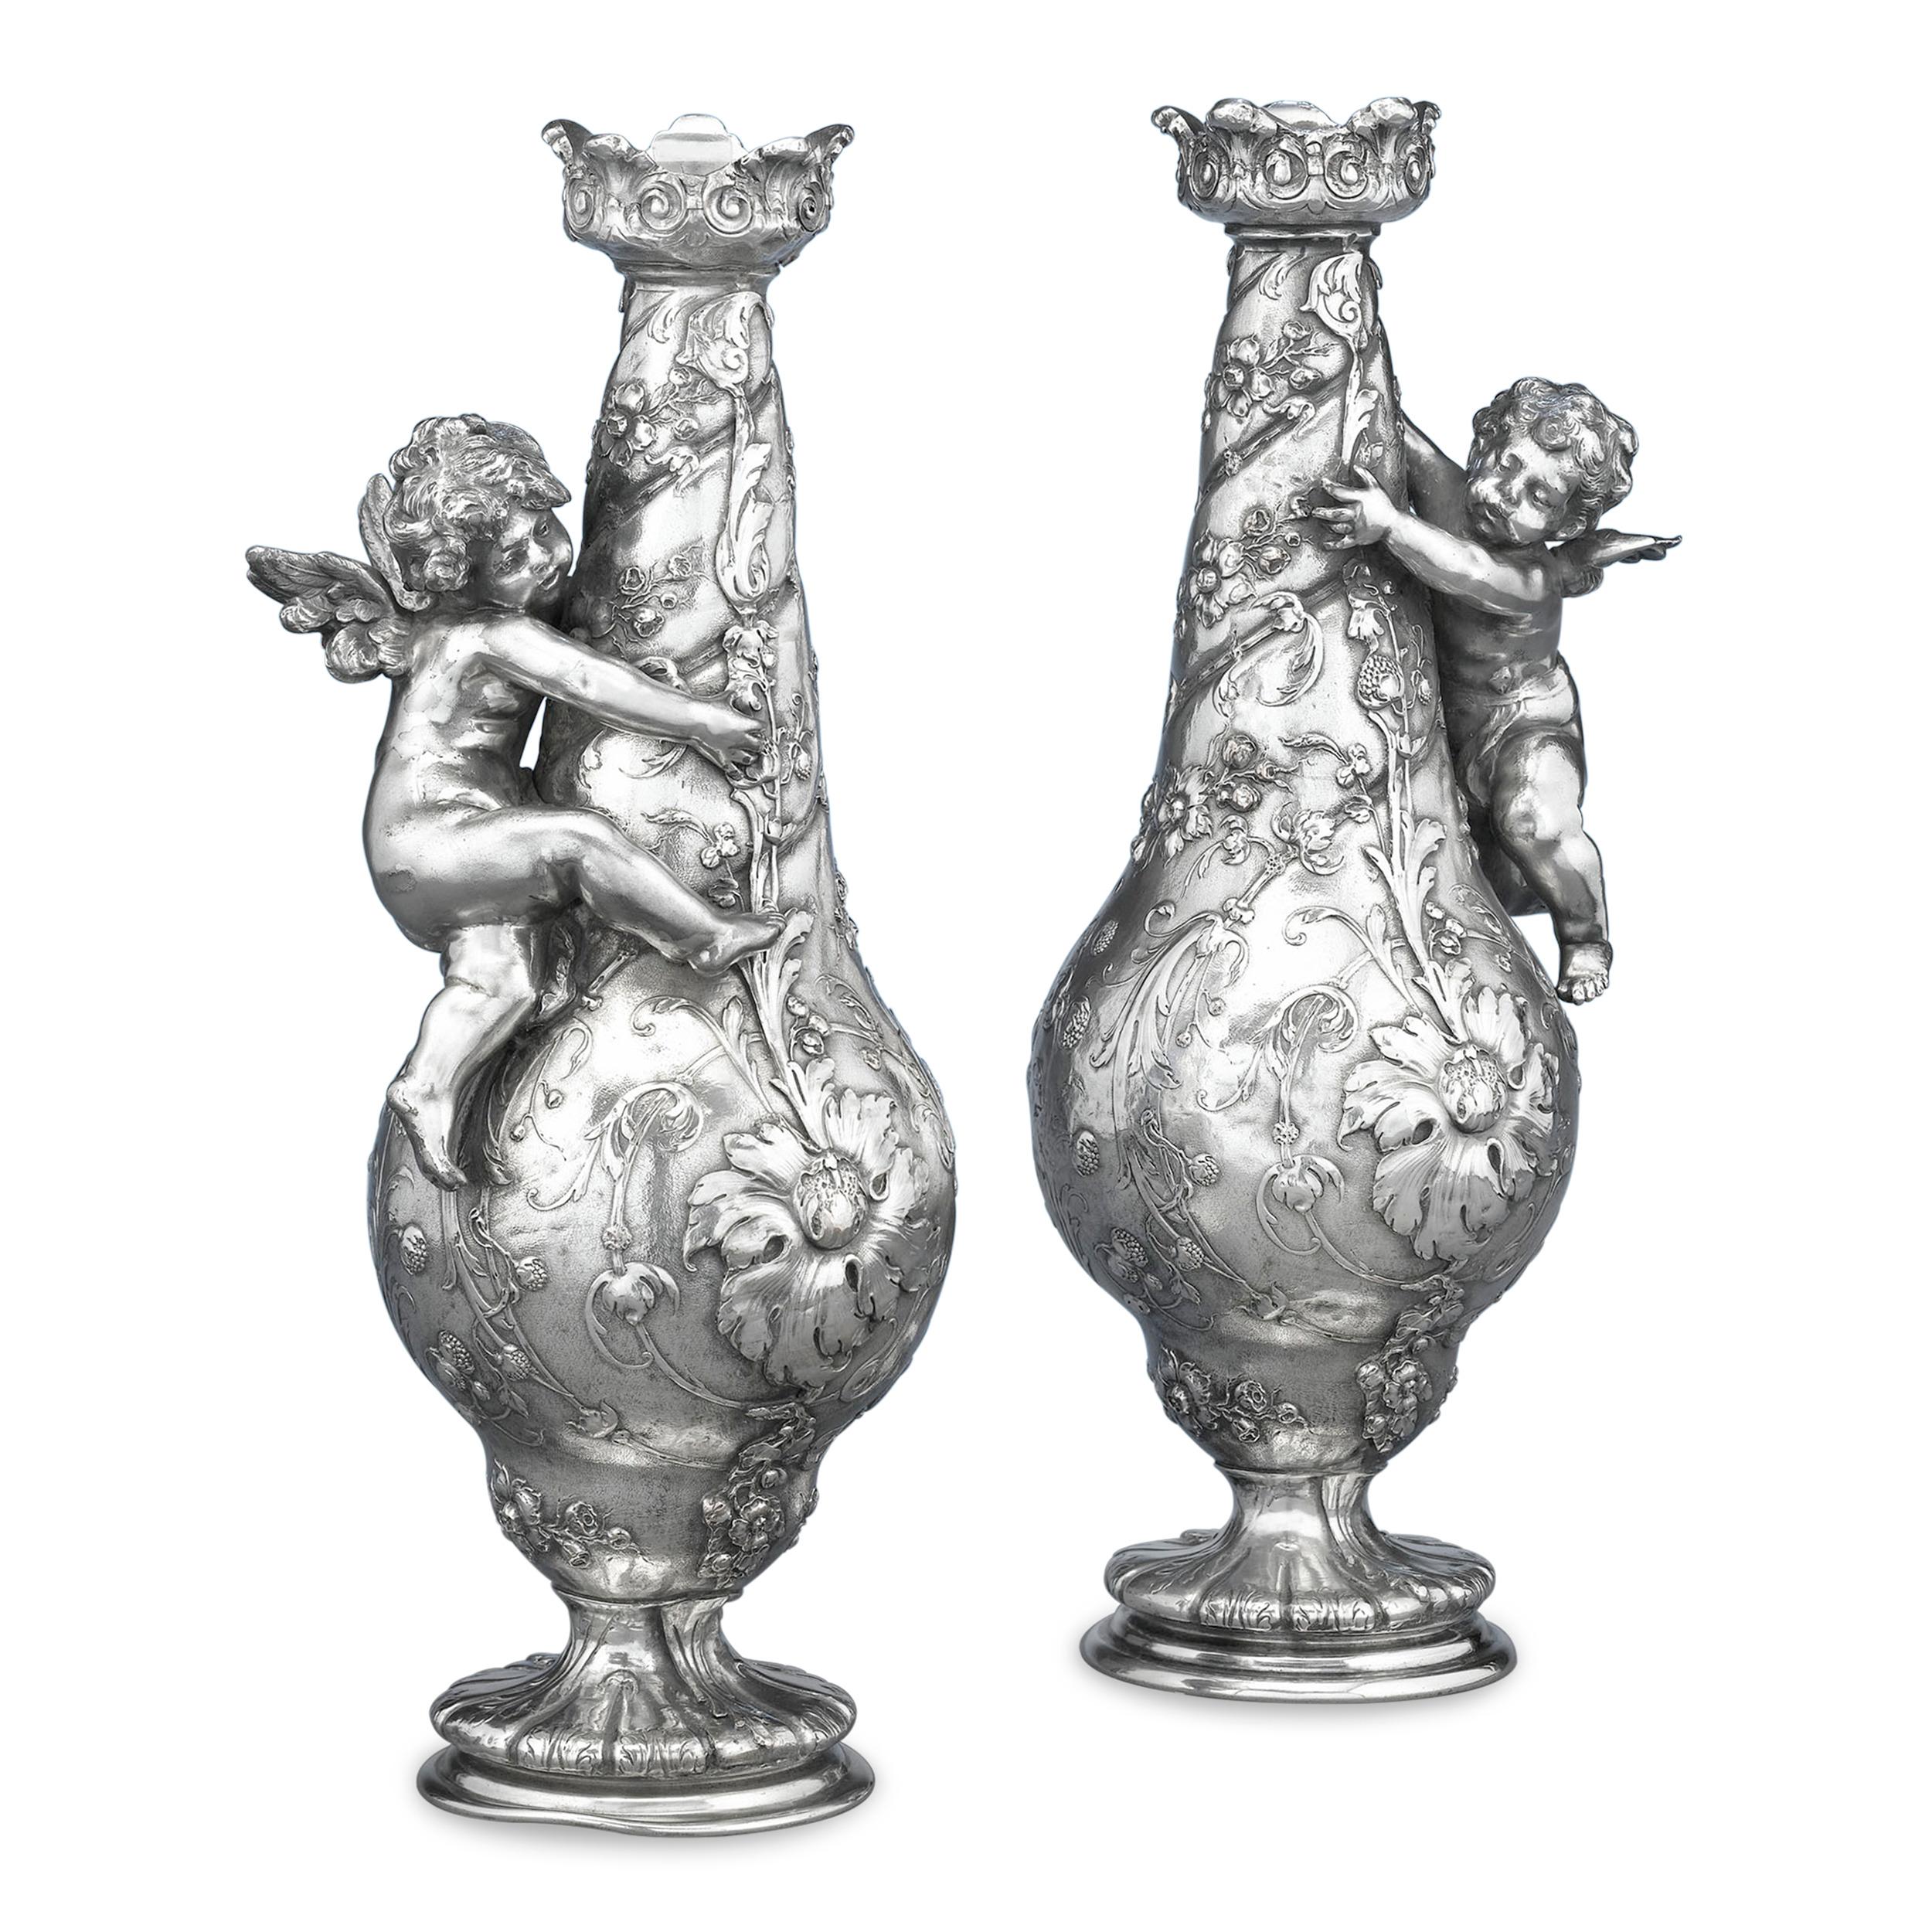 Winged cupids cling to these marvelous silvered bronze vases. Crafted in the neoclassical style, the vases also display a hint of the Arts and Crafts aesthetic, as they resemble a pair of luscious and naturalistic pears, each draped in flowering